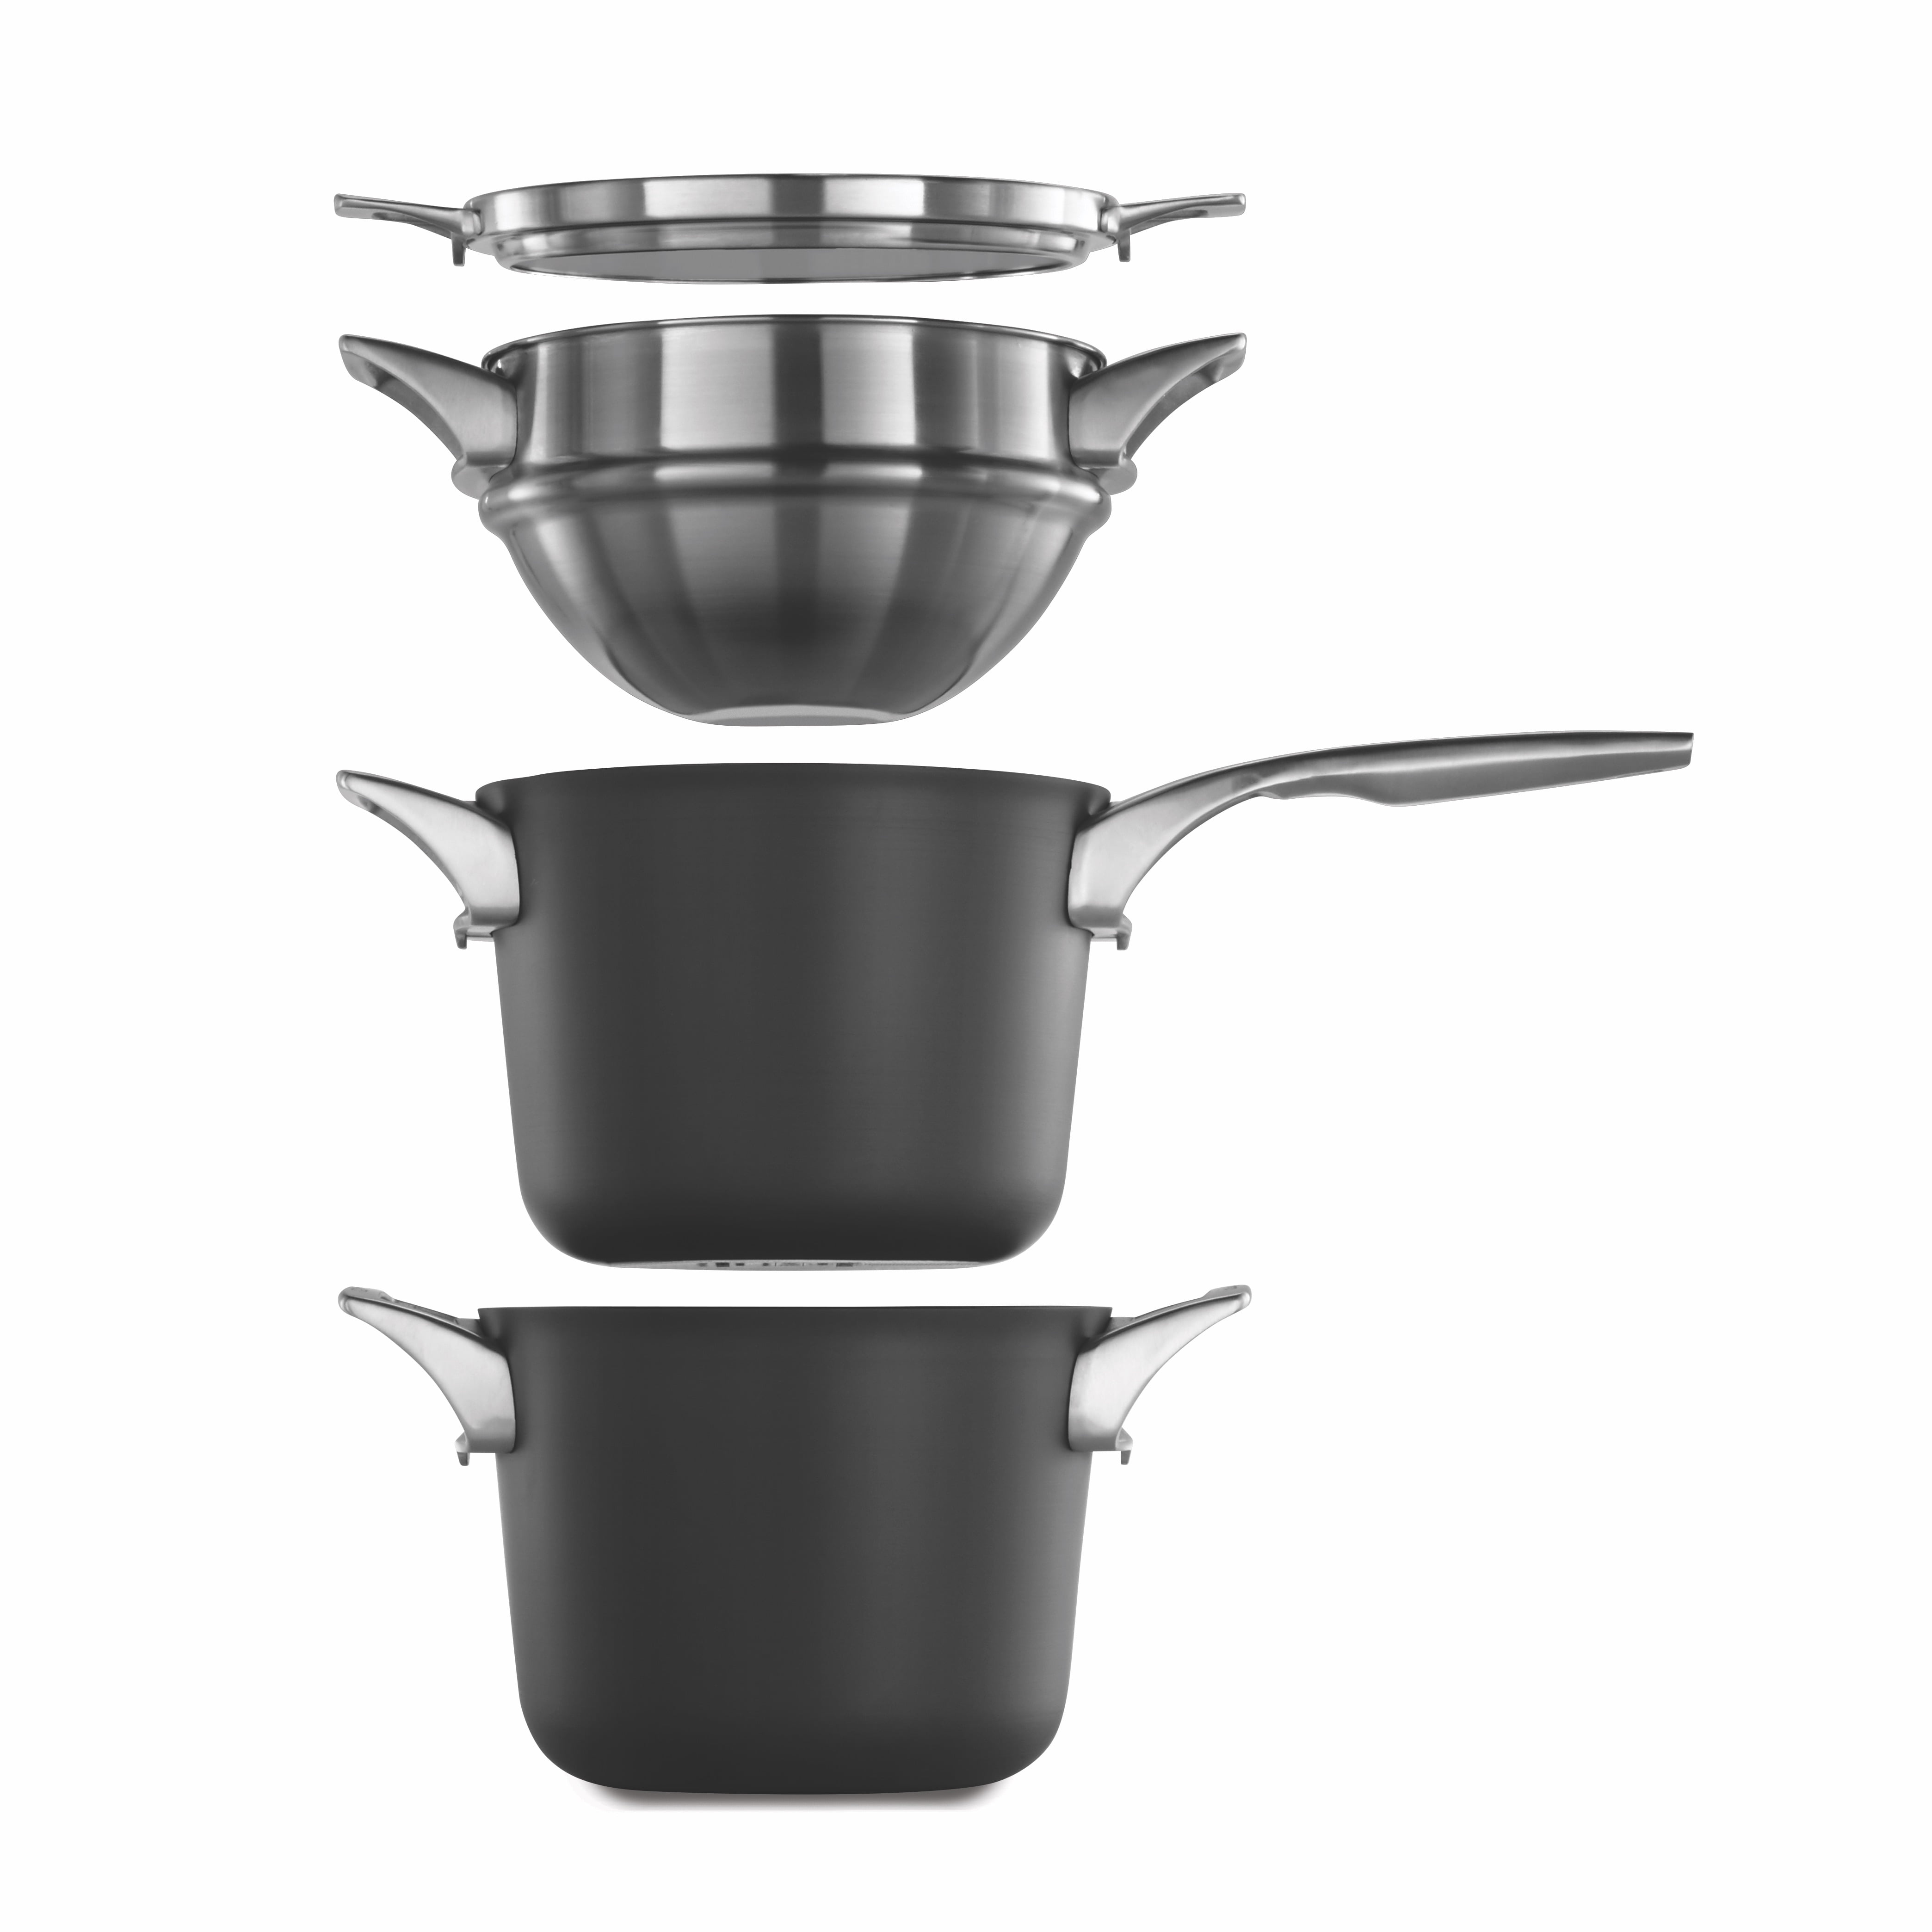 Calphalon Simply Calphalon 2-Quart Small Stainless-Steel Double Boiler  Insert,  price tracker / tracking,  price history charts,   price watches,  price drop alerts